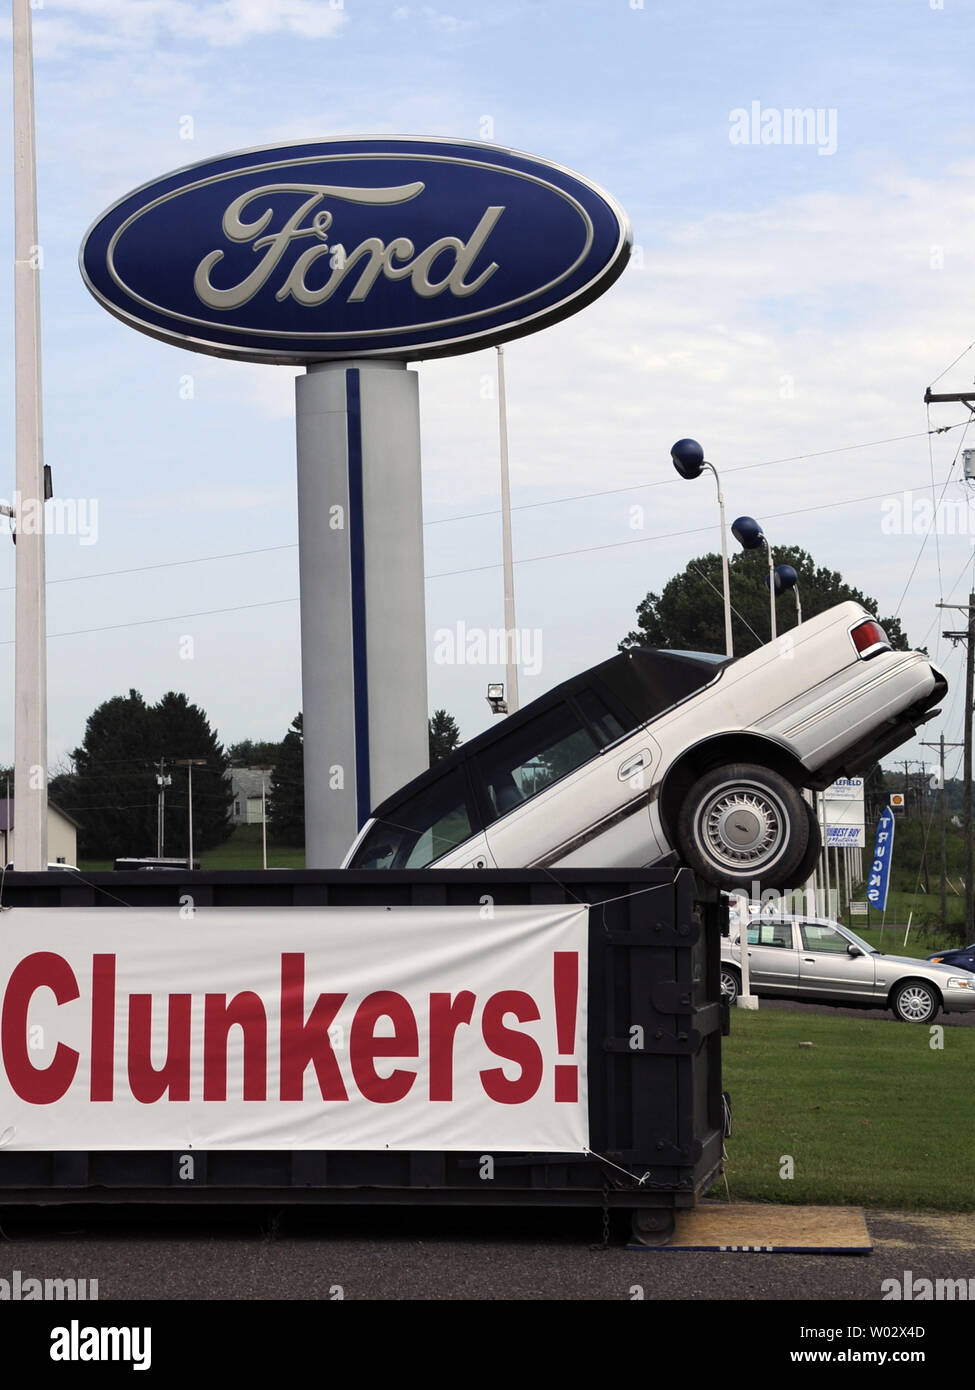 A Display With A Car In A Dumpster At A Ford Auto Dealership Advertises 